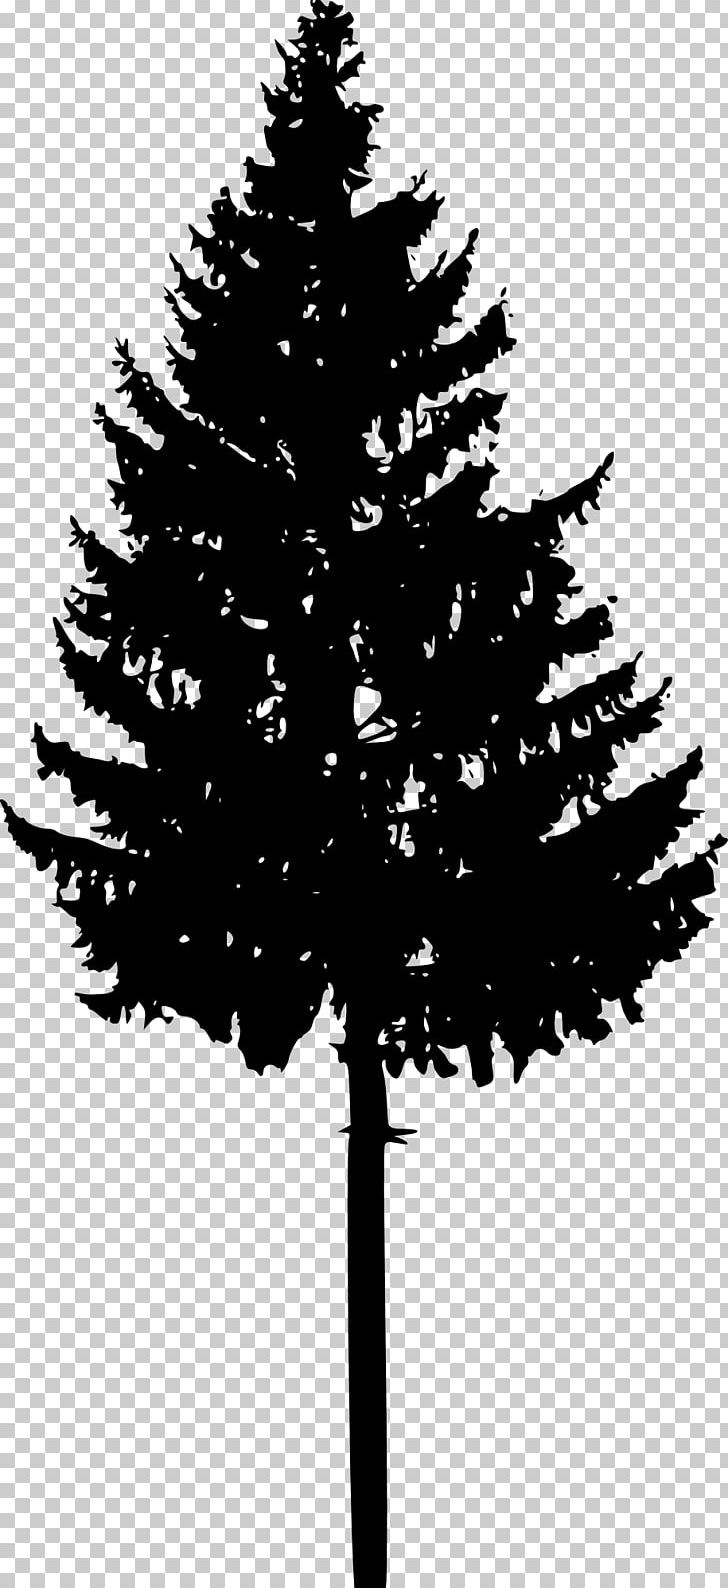 Tree Spruce Fir Conifers Silhouette PNG, Clipart, Black And White, Branch, Christmas Decoration, Christmas Ornament, Christmas Tree Free PNG Download